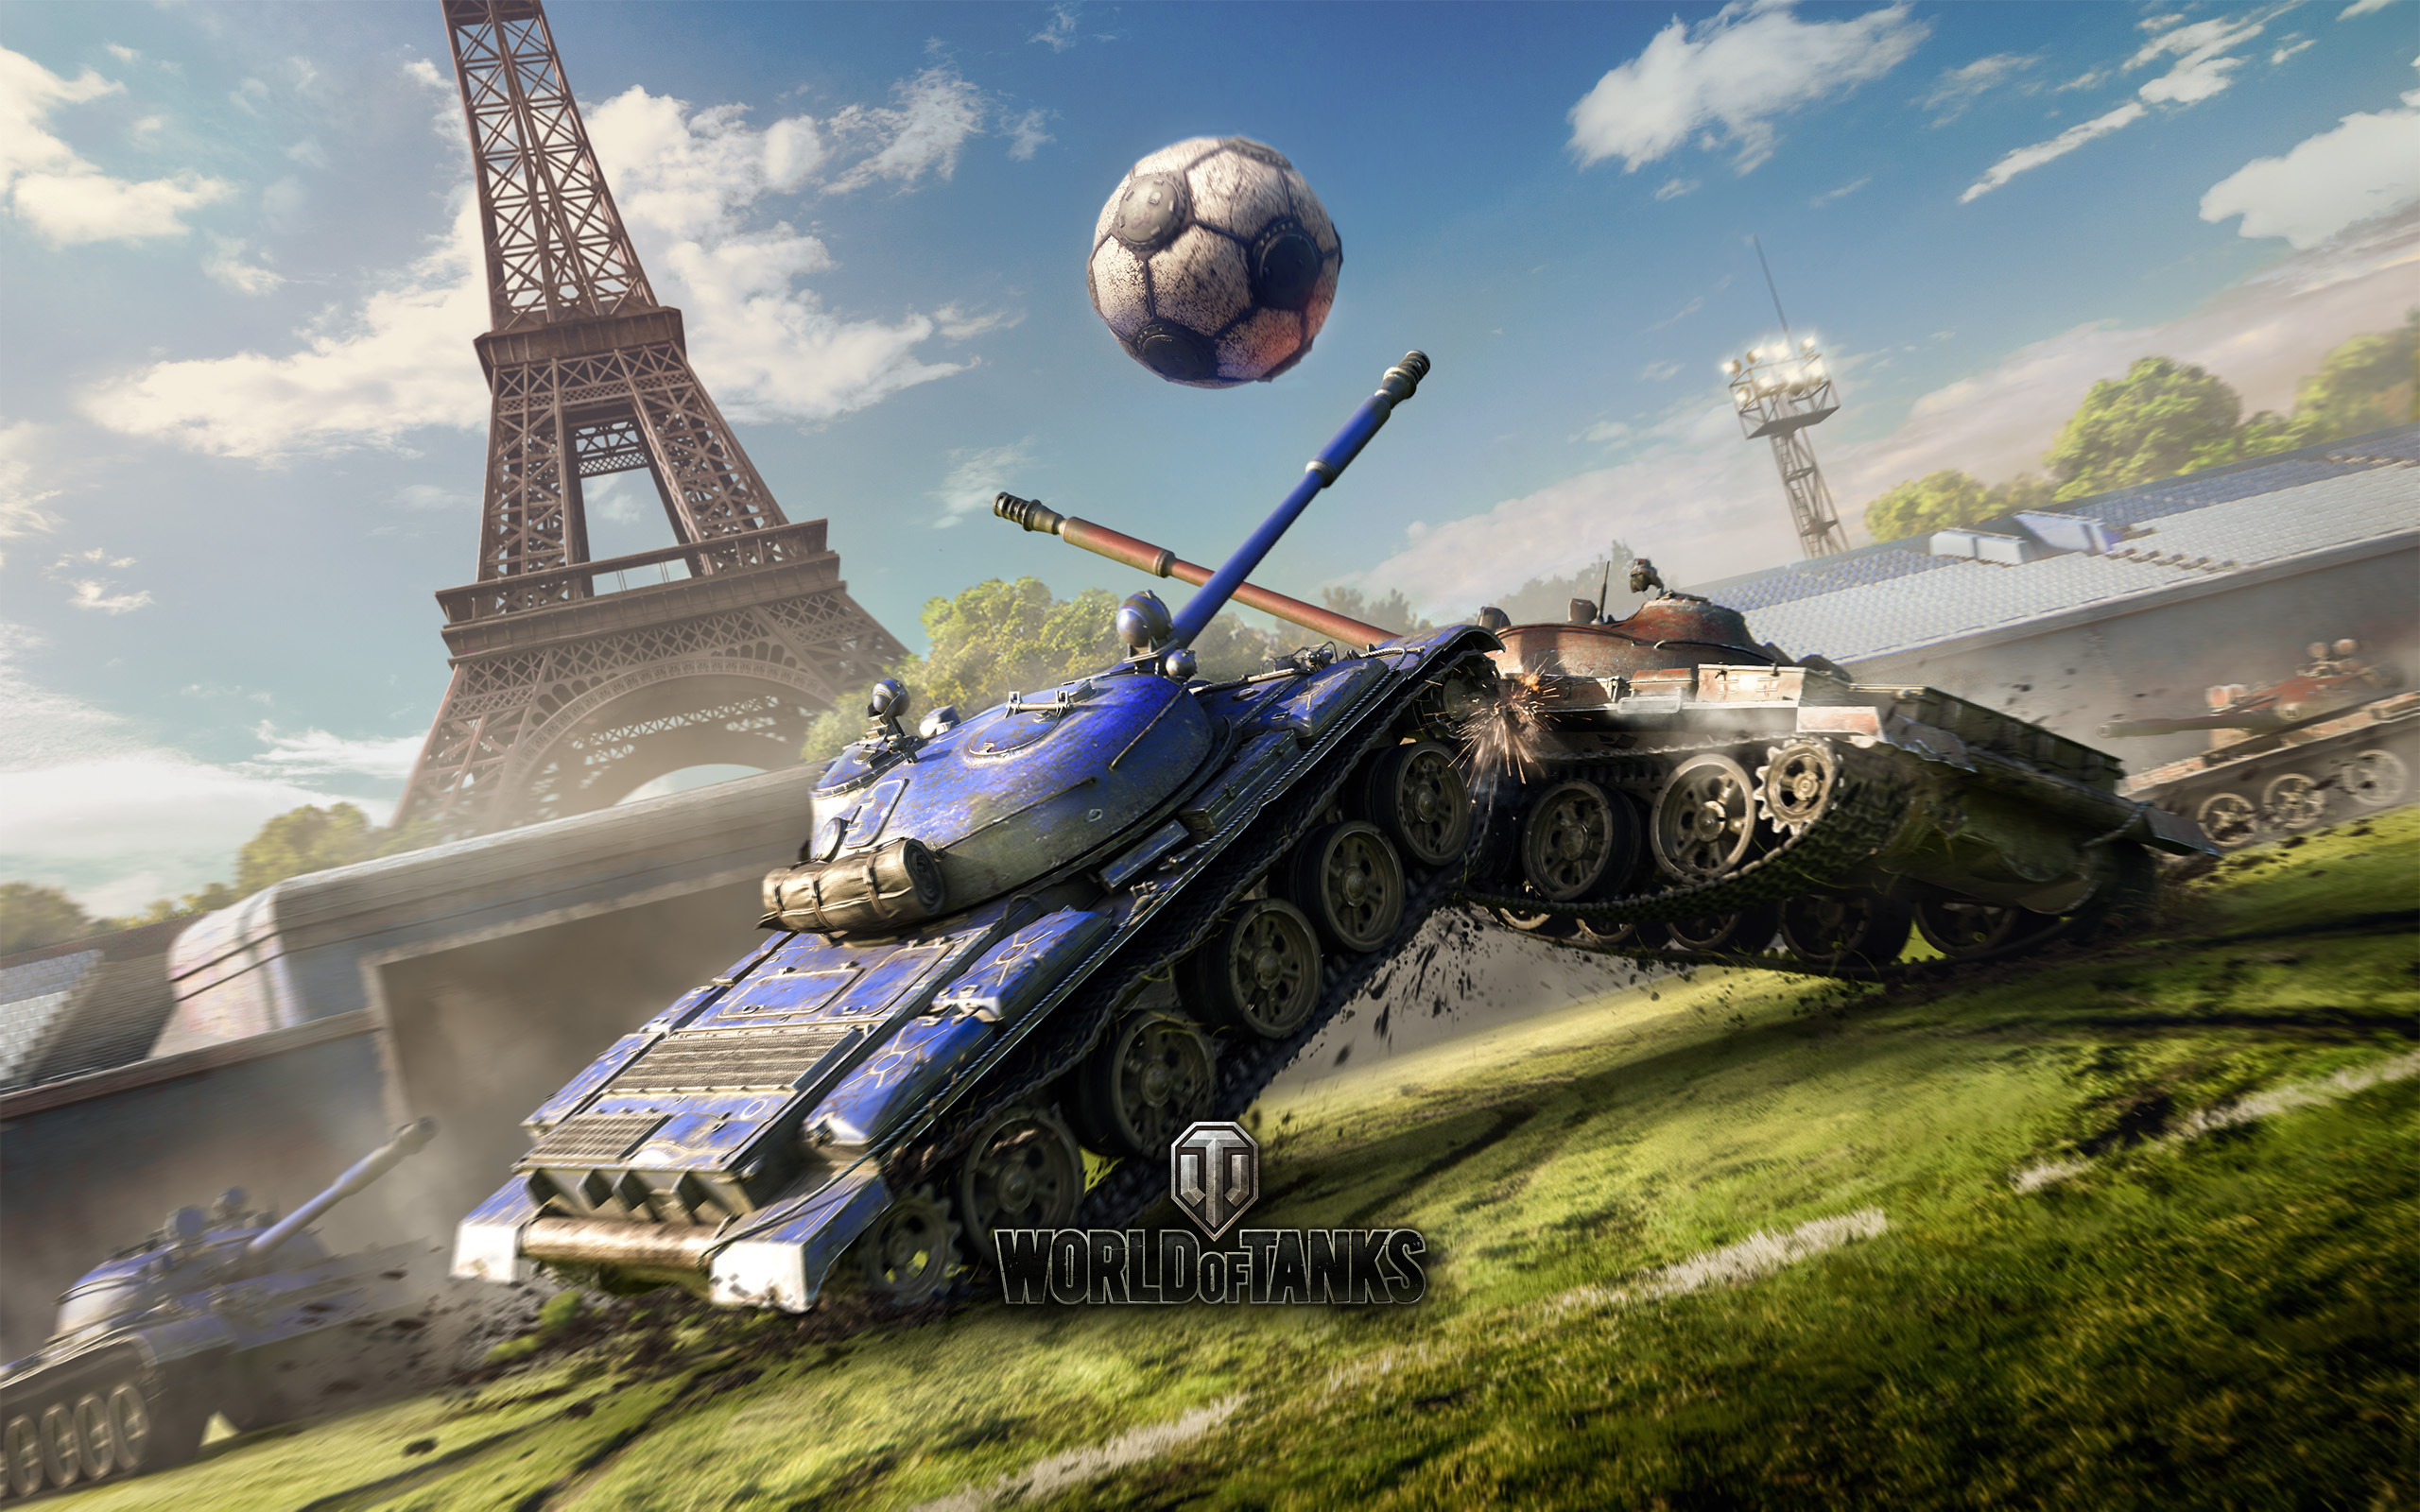 Wallpapers world of tanks PS4 games computer games on the desktop